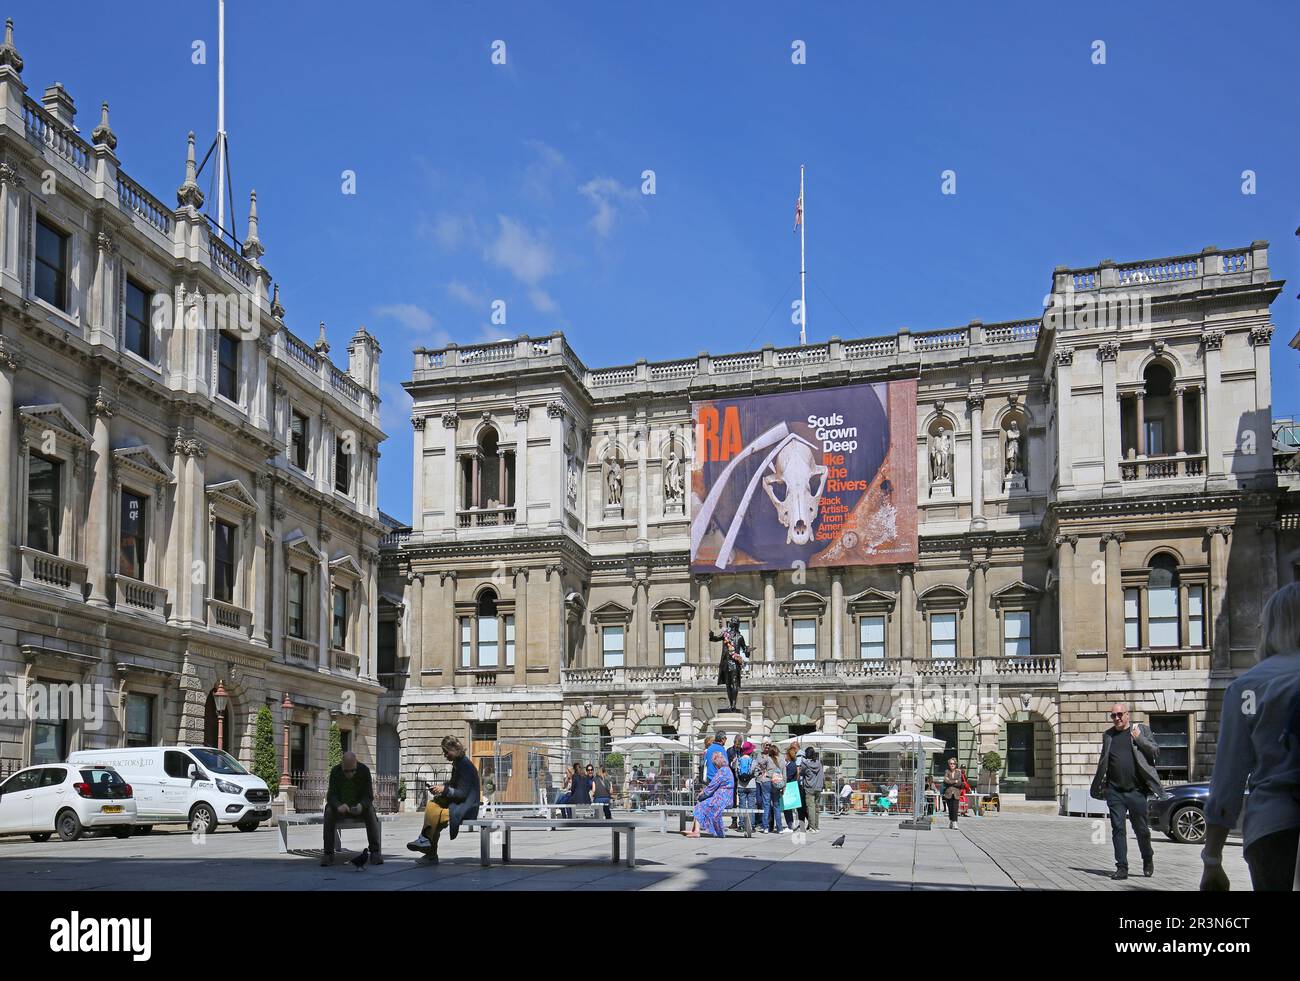 Courtyard of Burlington House, Piccadilly, London, UK. Home to the The Royal Academy of Arts. Shows main public entrance. Stock Photo